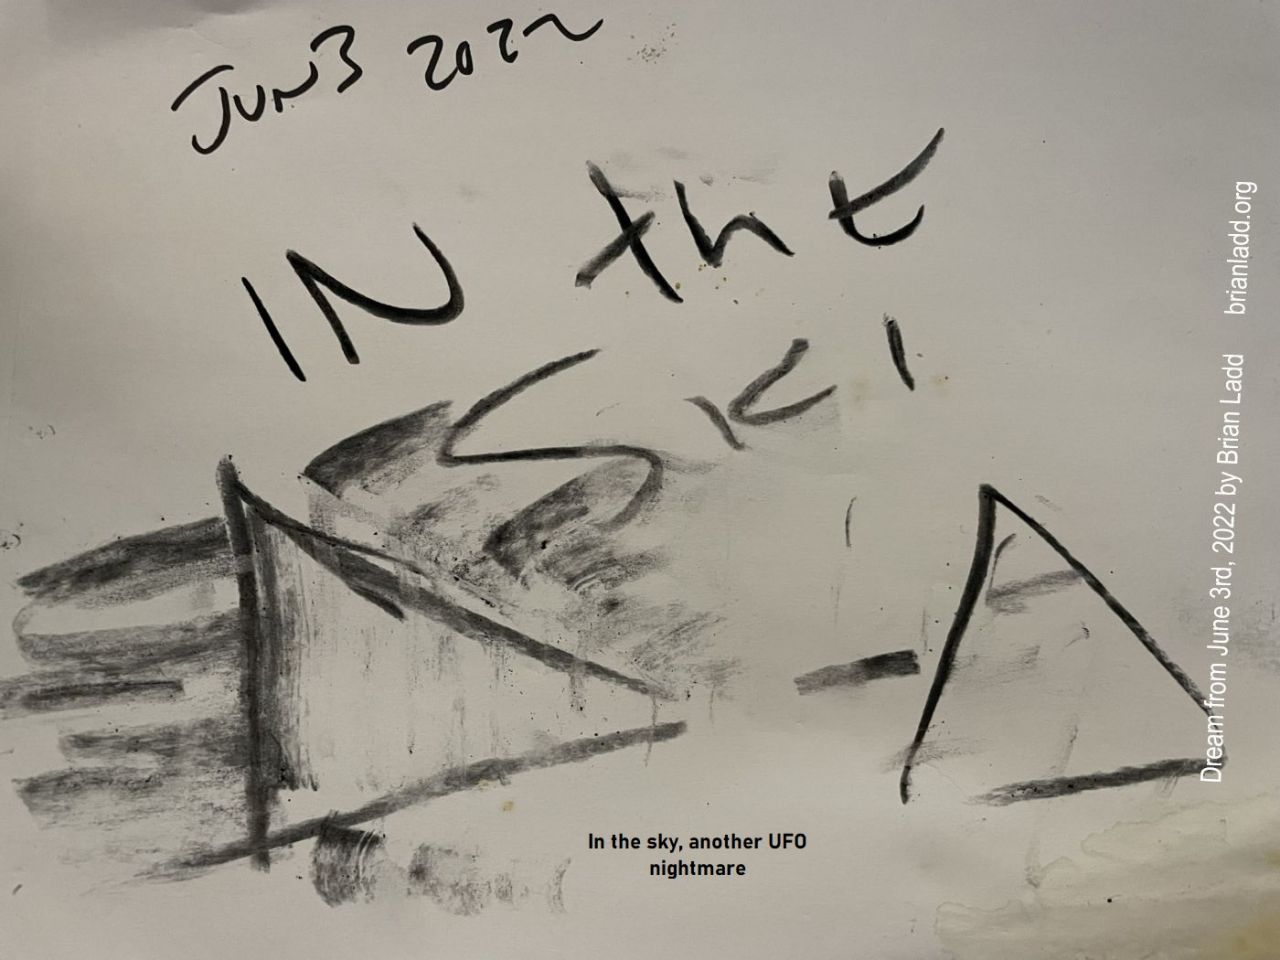 3 June 2022 1  In the sky, another UFO nightmare...
In the sky, another UFO nightmare.
